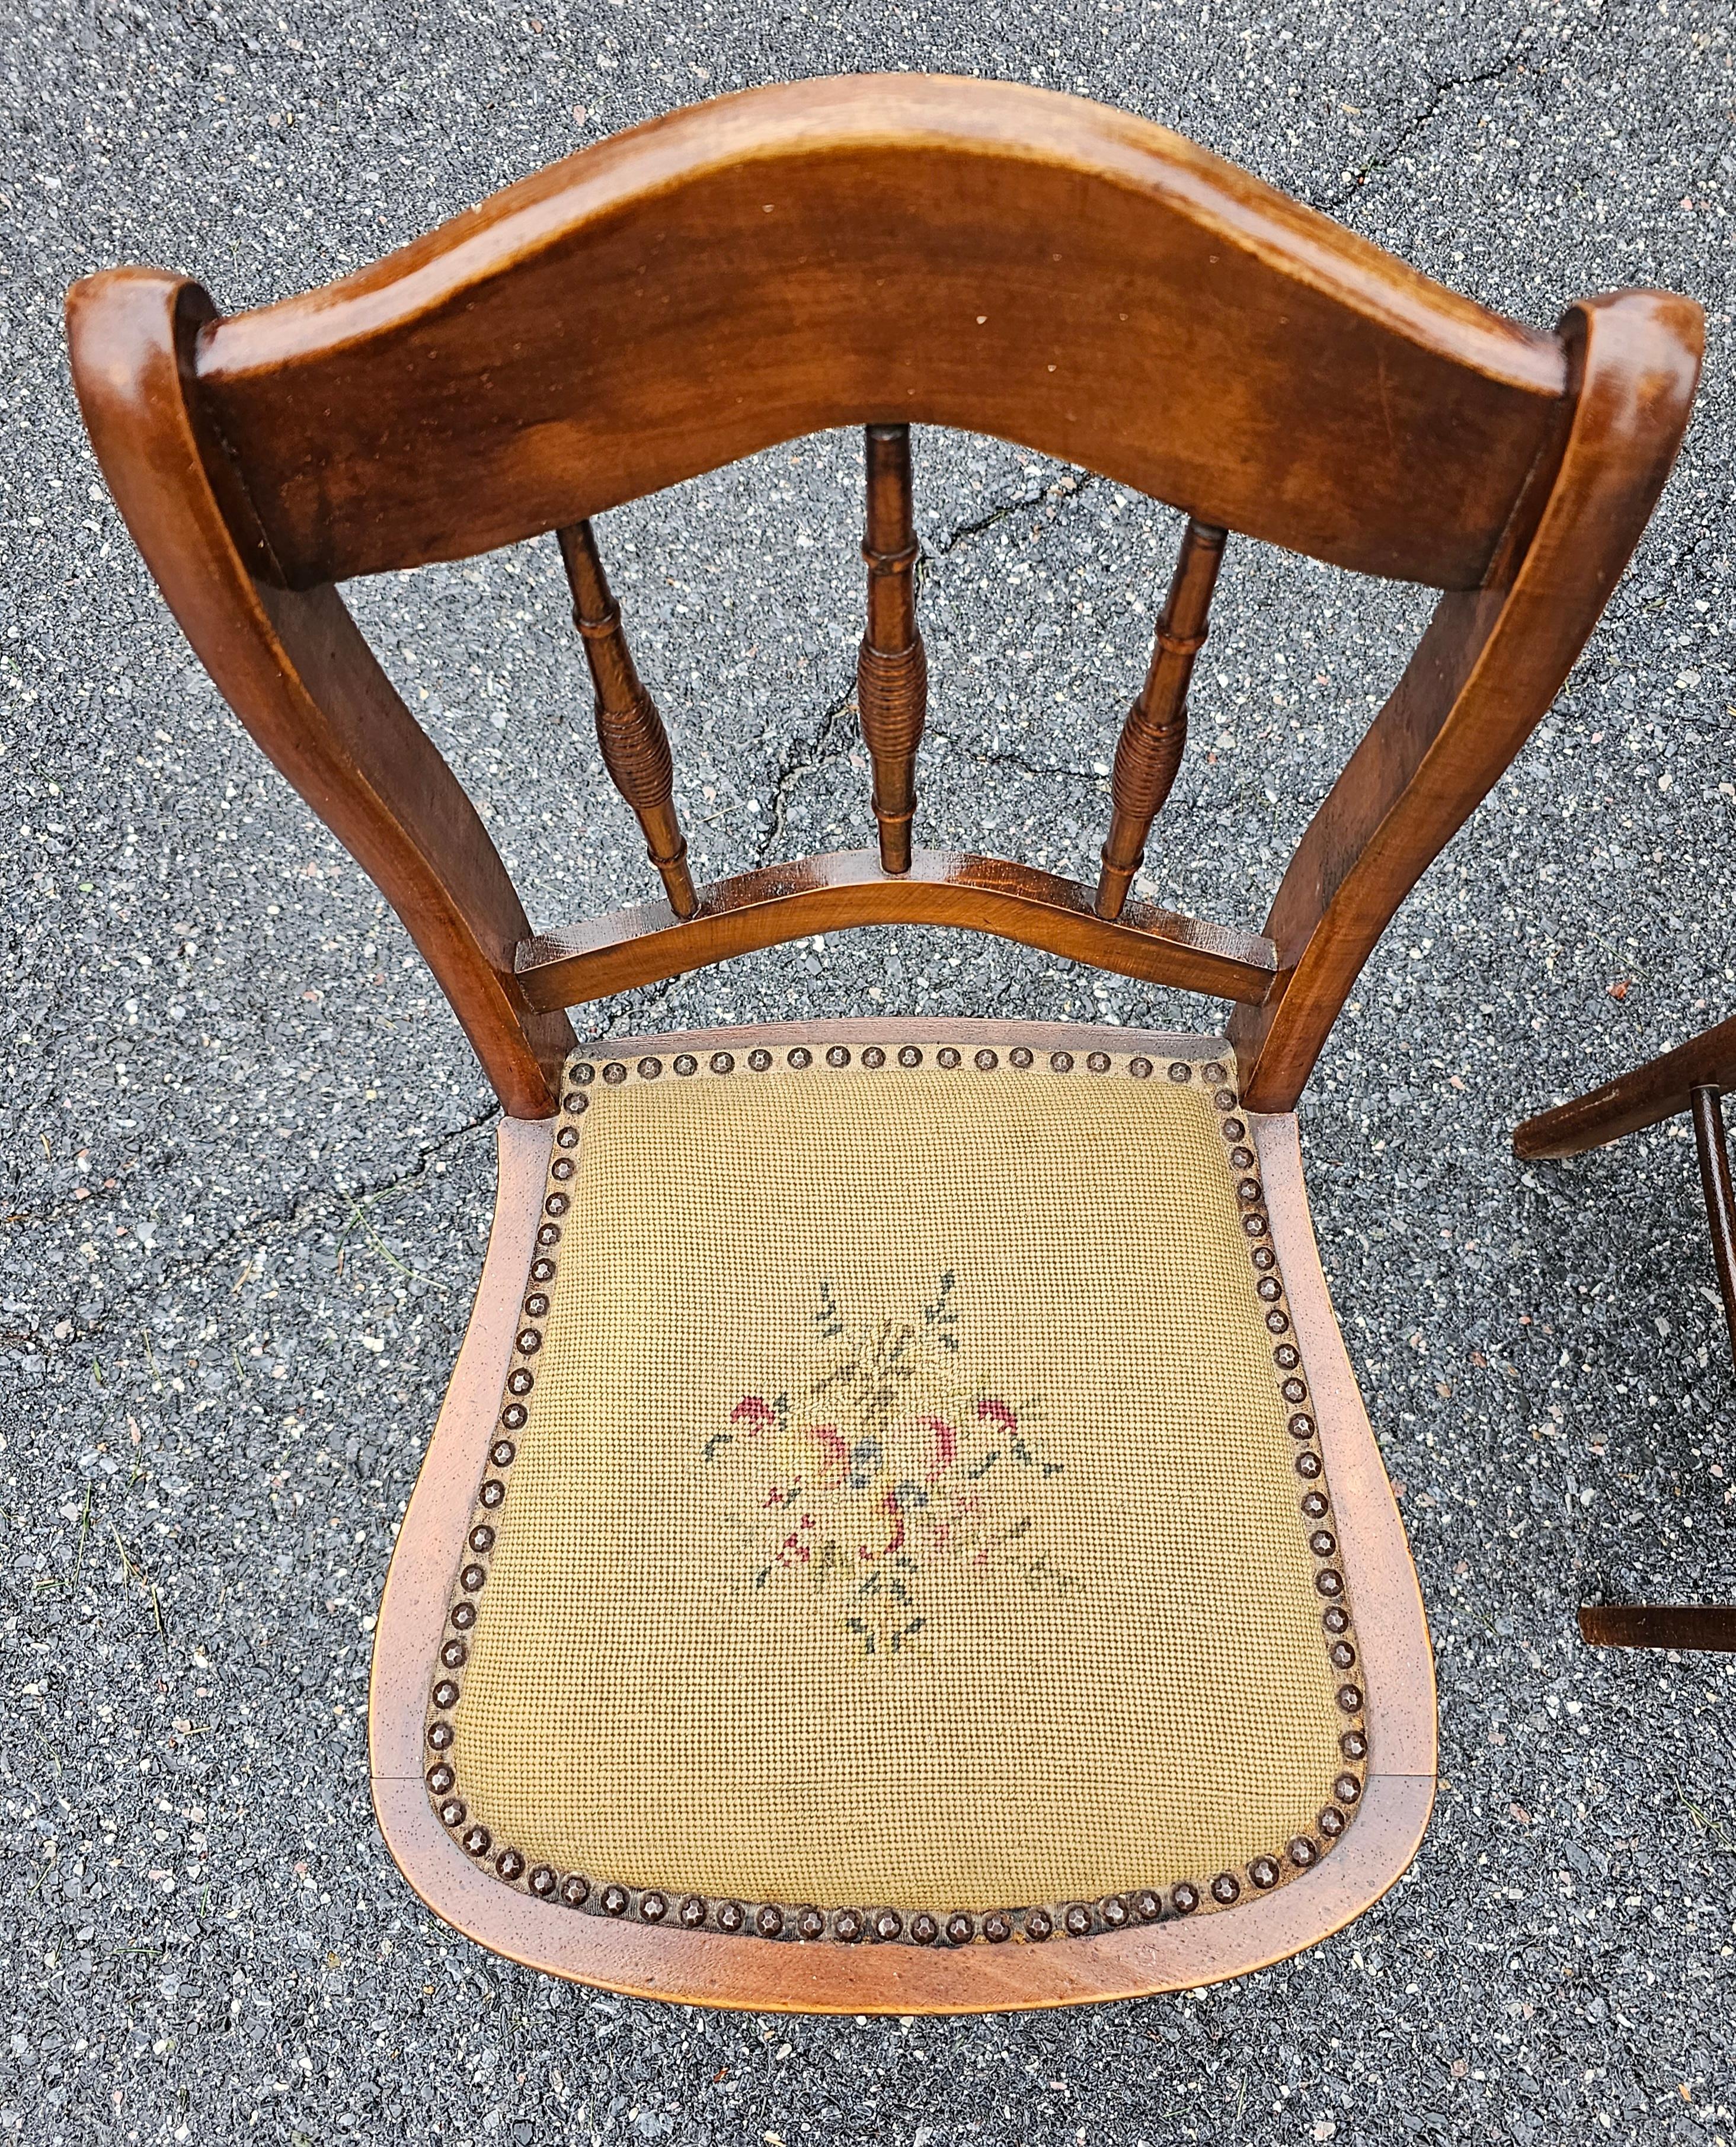 19th Century American Walnut and Needlepoint Upholstered Seat Side Chairs, Pair For Sale 1